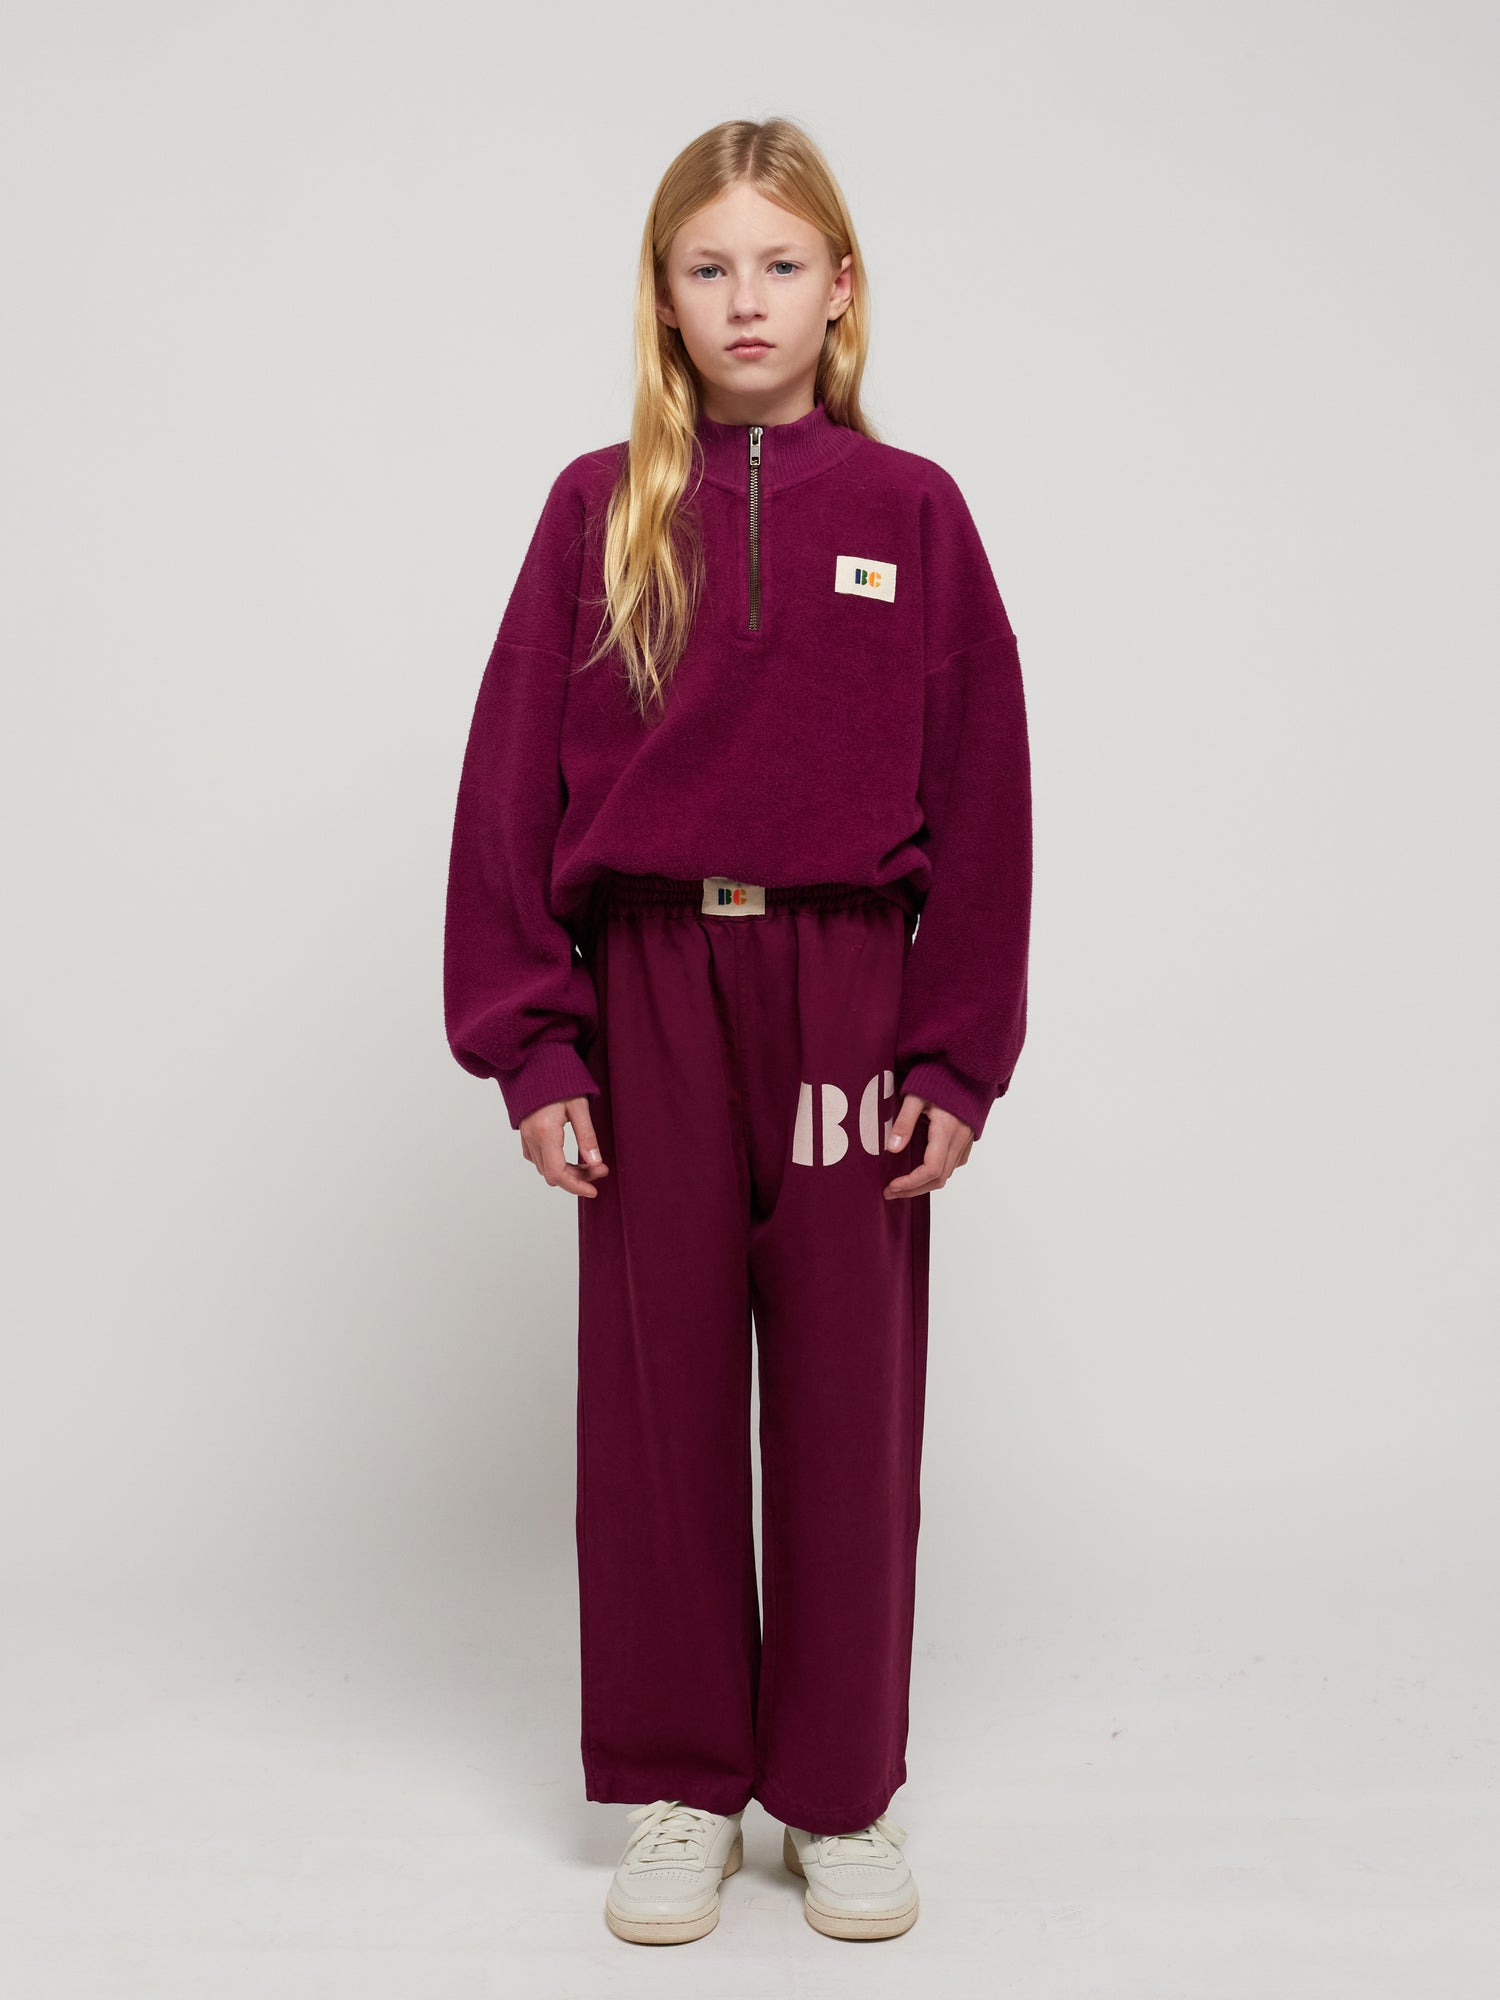 B.C. Label Sweatshirt by Bobo Choses. 100% organic cotton purple fleece sweatshirt. Designed with balloon sleeves, dropped shoulder, ribbed mock neck & hems, and a half zipper. It has a loose fit. Made ethically and sustainably in Portugal for Bobo Choses.